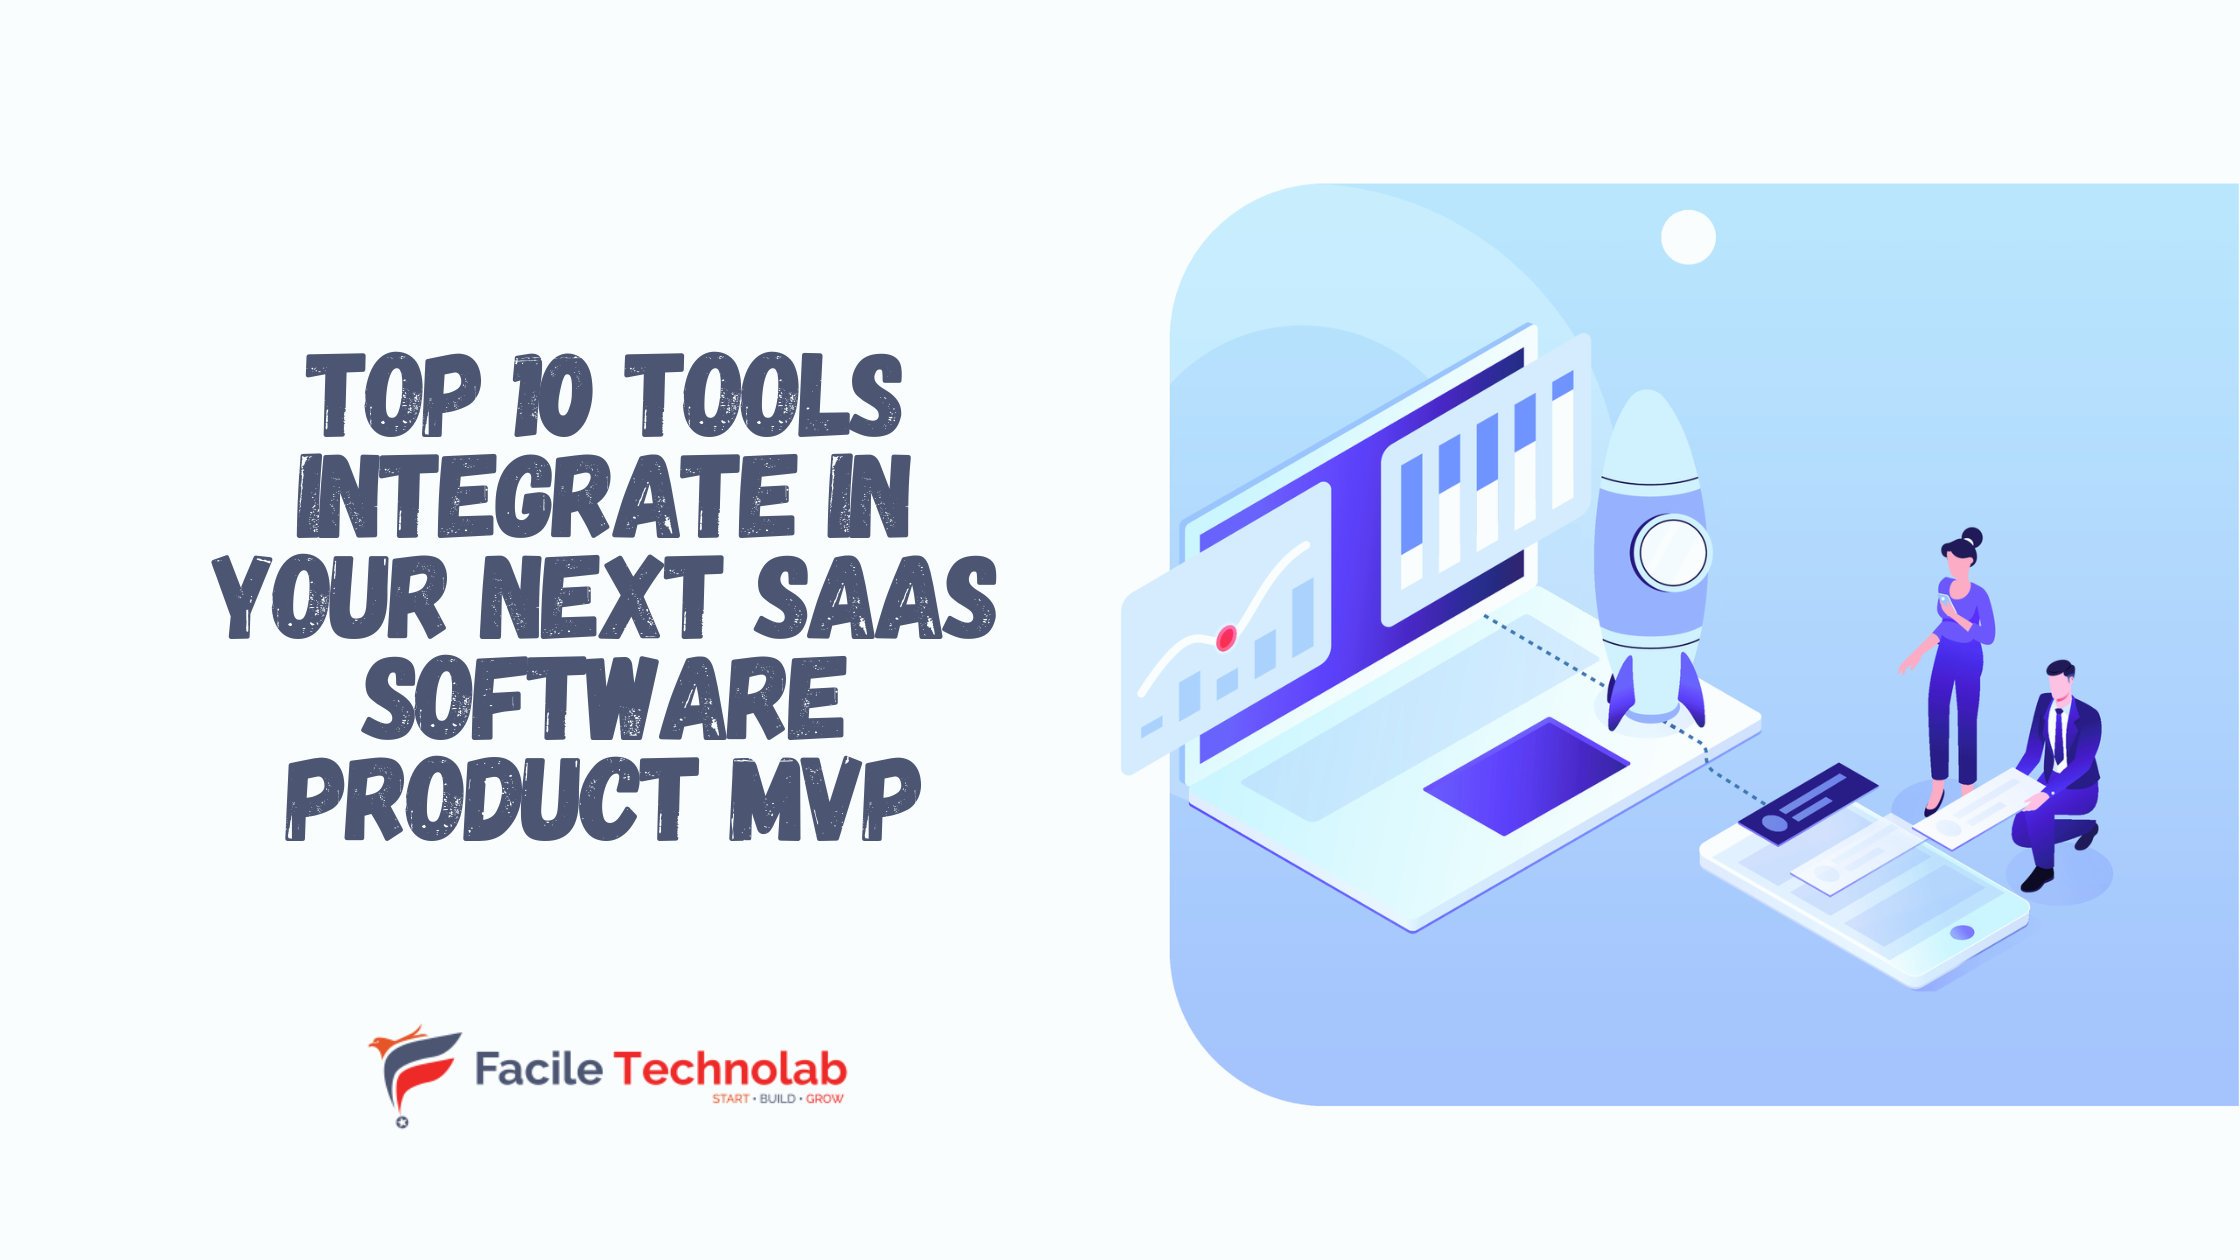 Top 10 Tools Integrate in Your next SaaS Software Product MVP